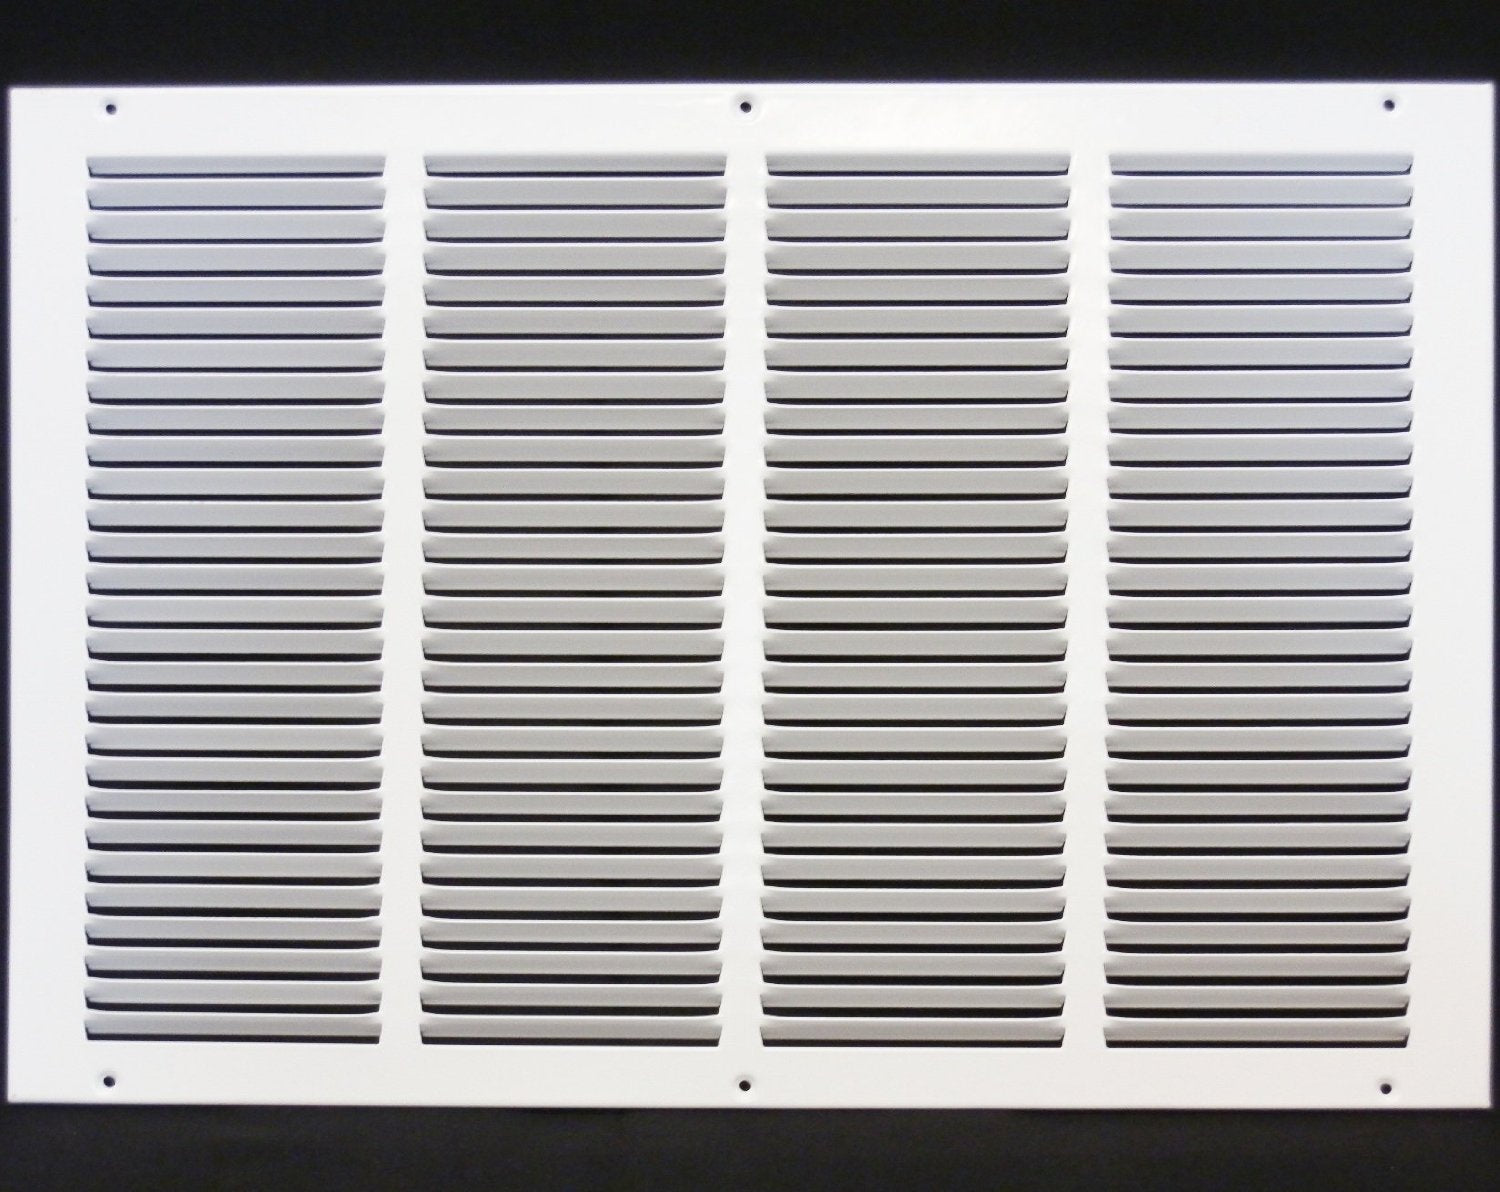 20" X 12" Air Vent Return Grilles - Sidewall and Ceiling - Steel